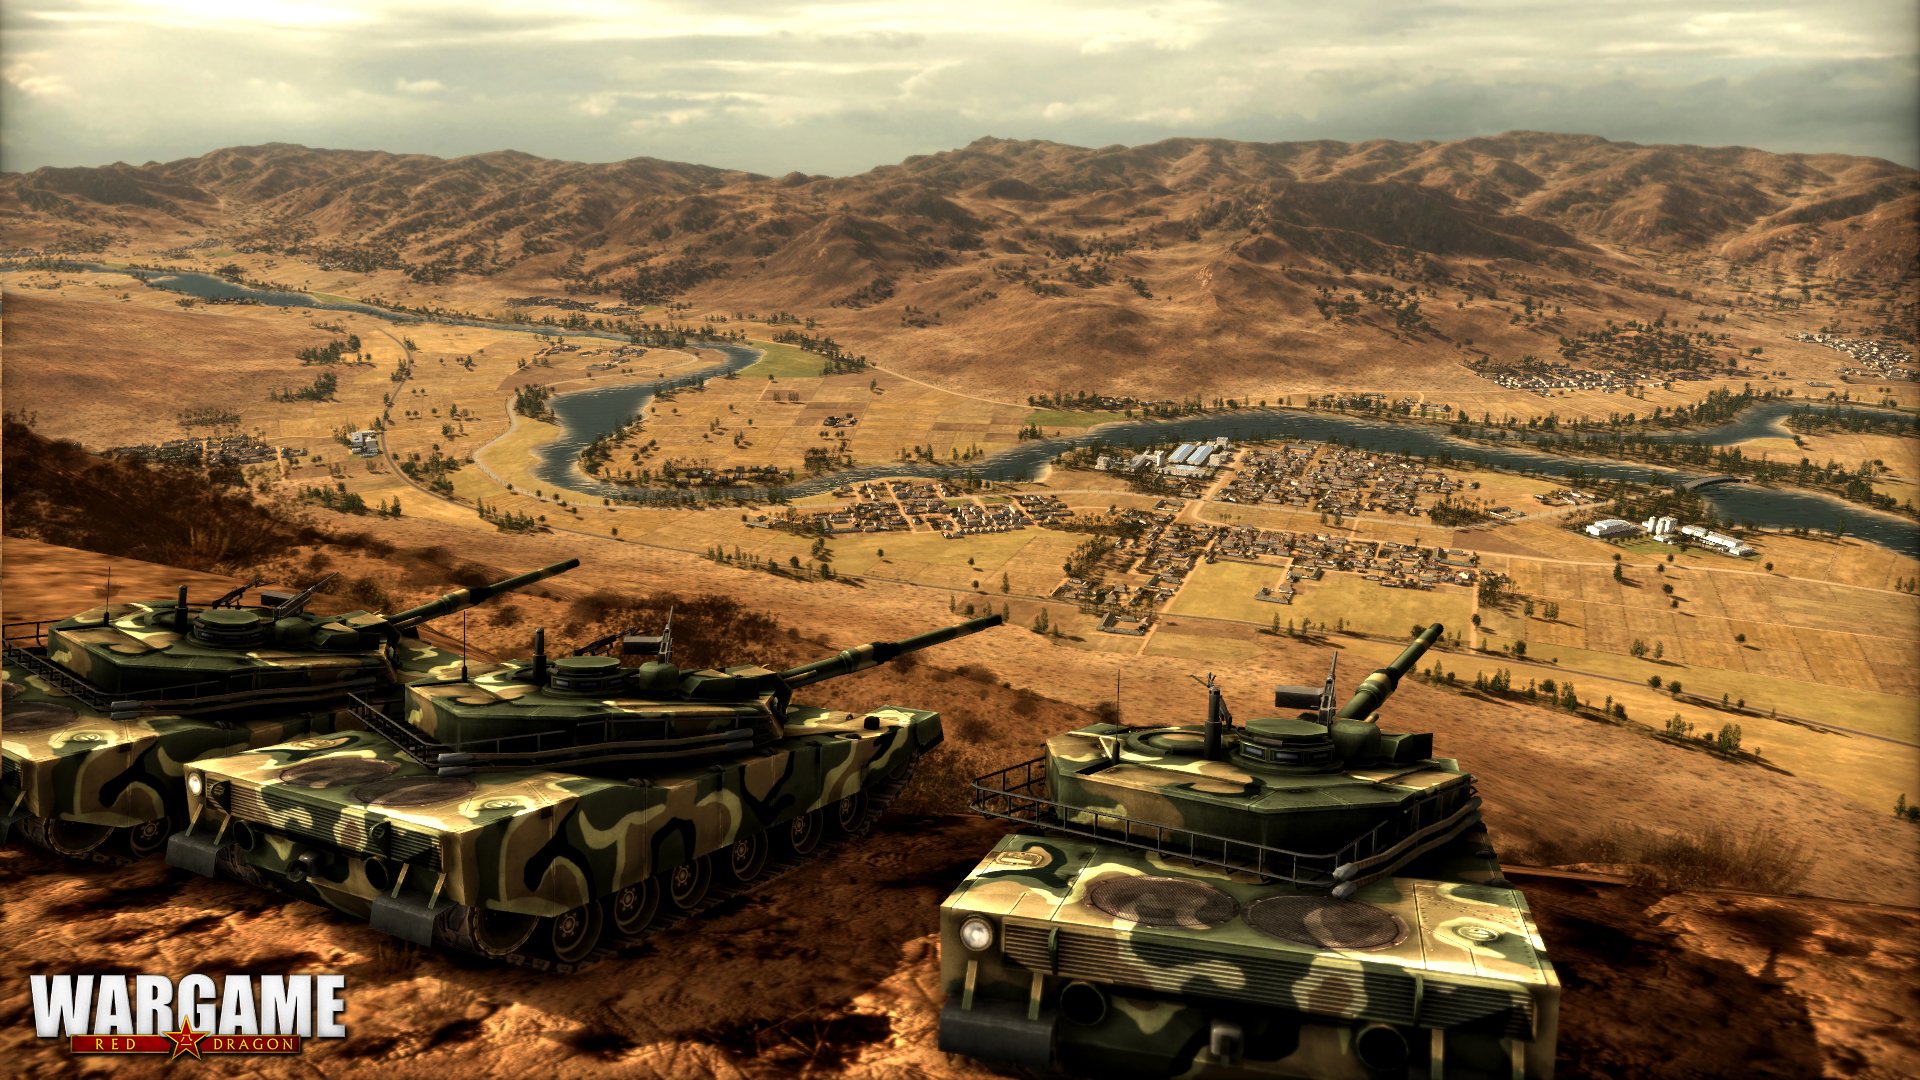 2 Wargame: Red Dragon HD Wallpapers | Backgrounds - Wallpaper Abyss